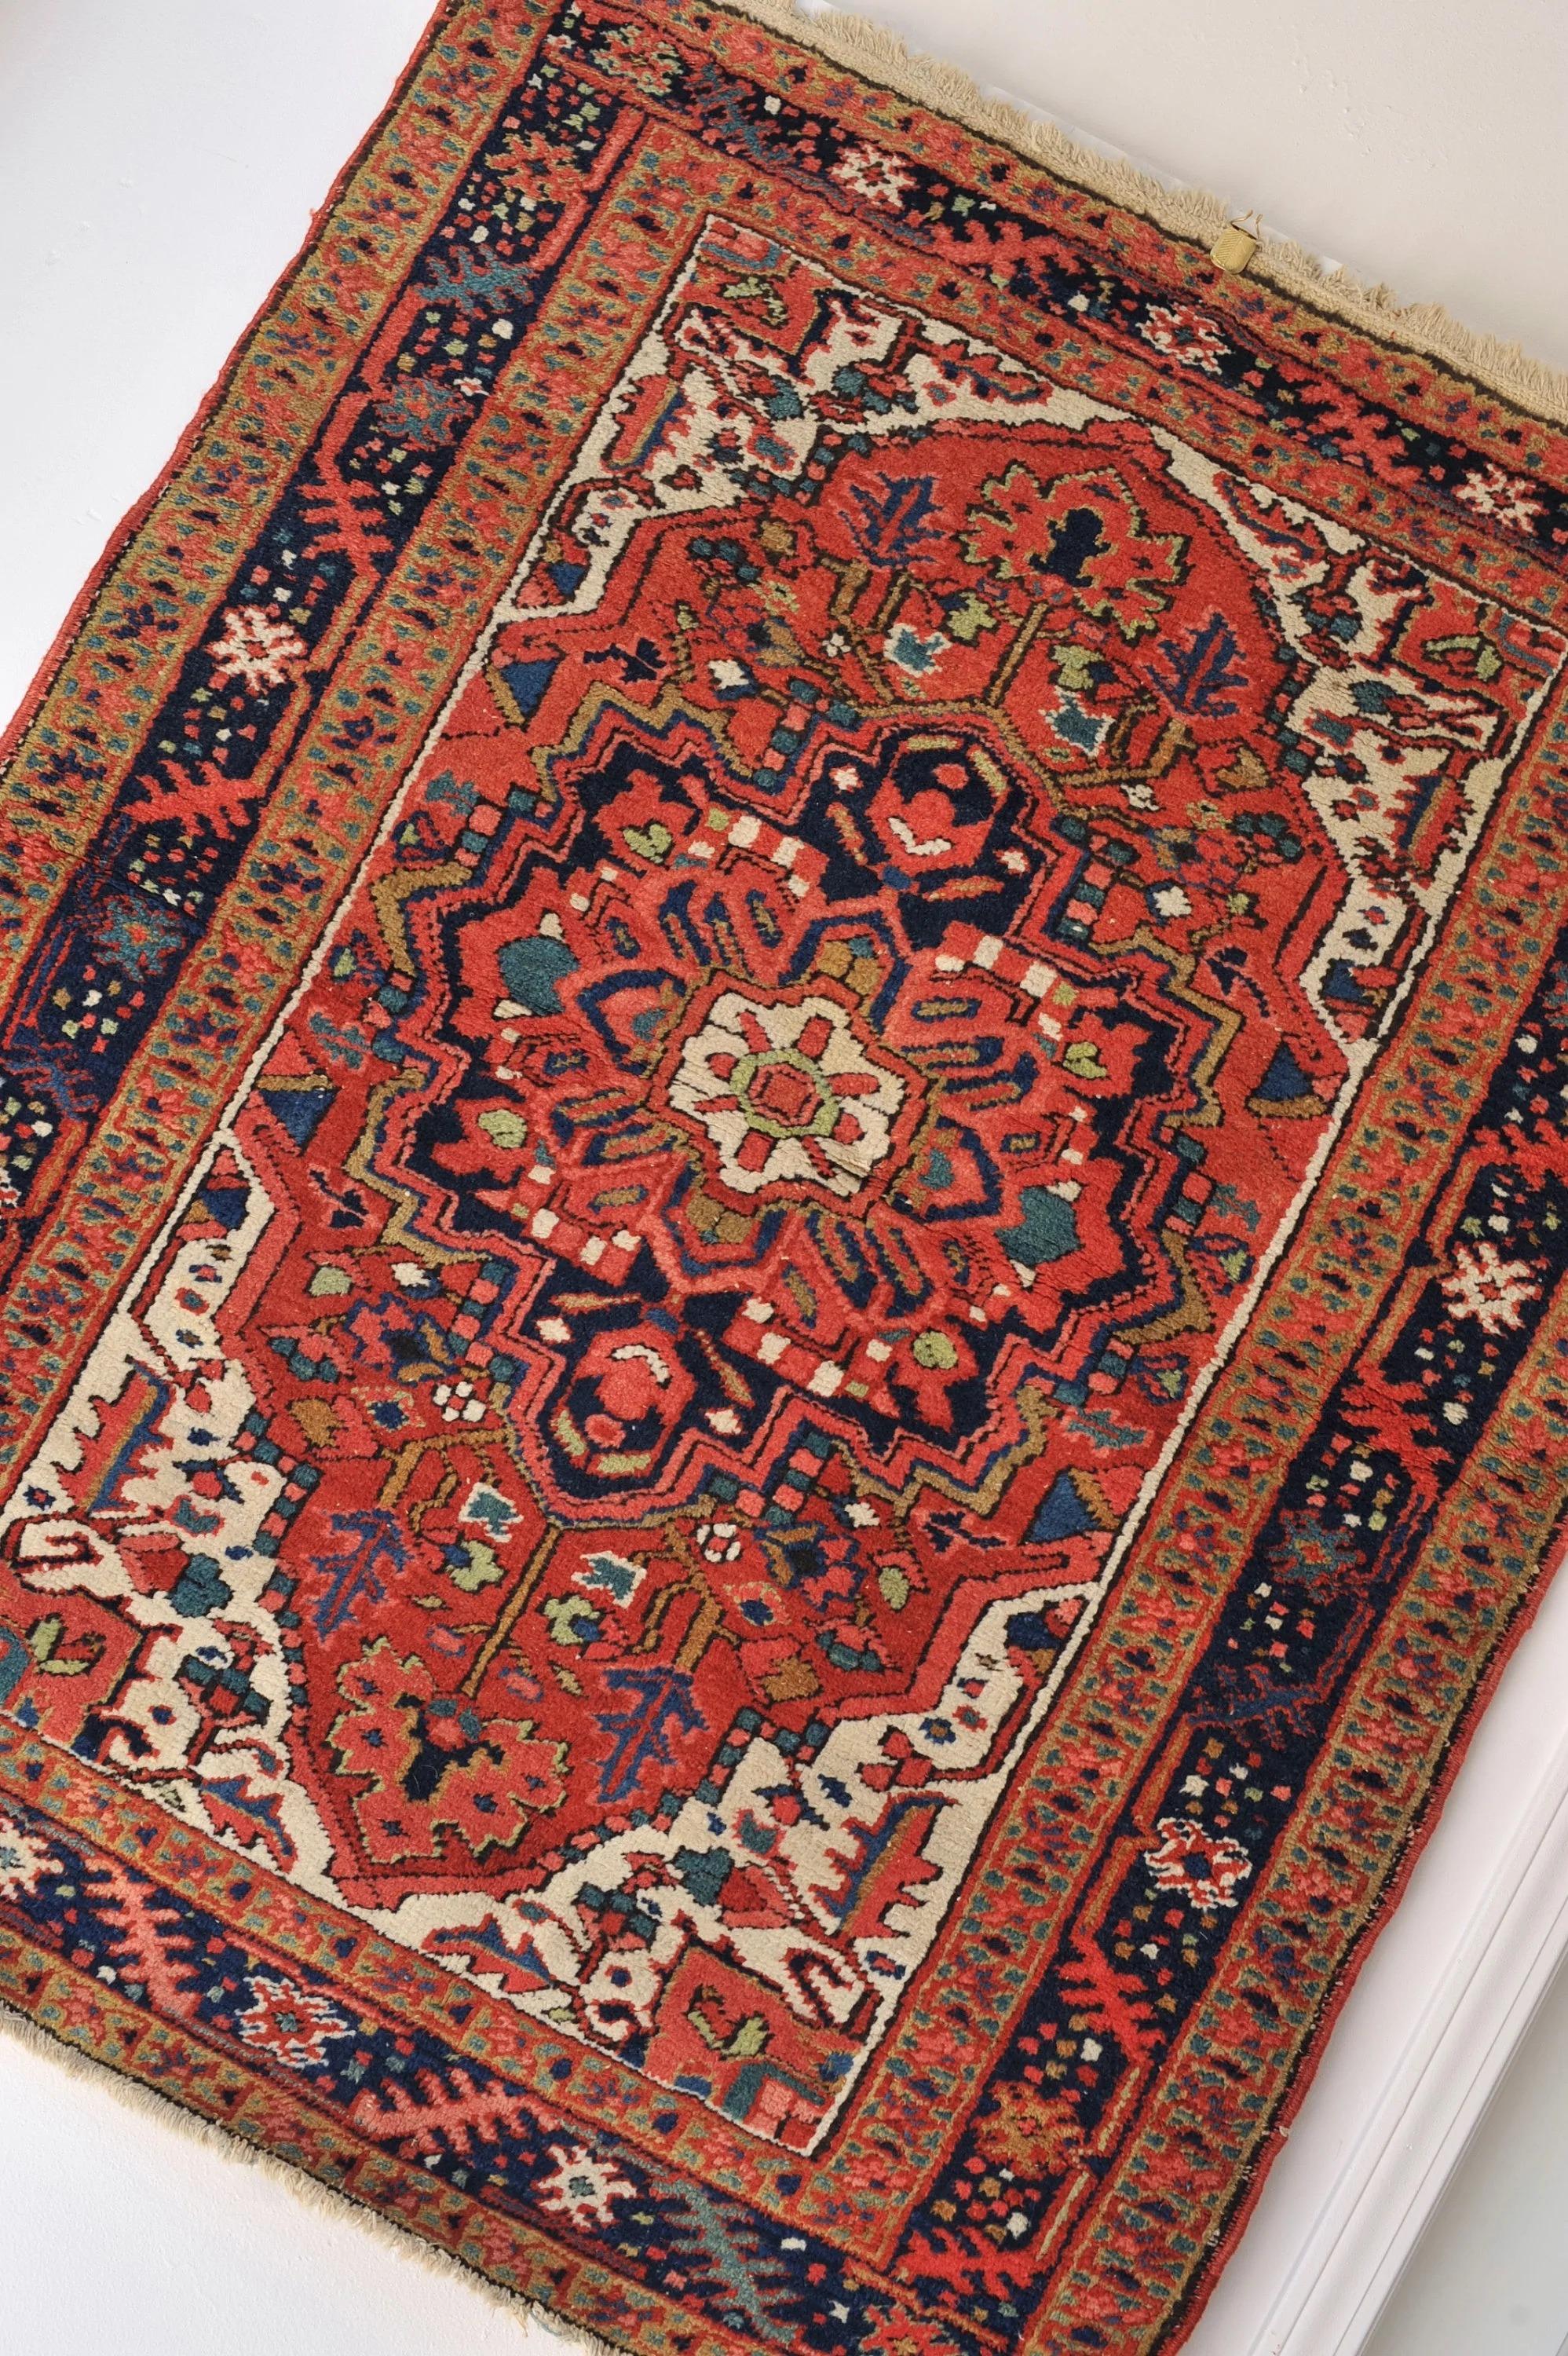 Antique Jr. Heriz Northwest Mat Rare Size

About: This is an absolute gem at this size, beauty, and from this village! It is really uncommon for this village to weave this fine of a rug in this odd and cute squarish size!  Natural dyes, tons of nice